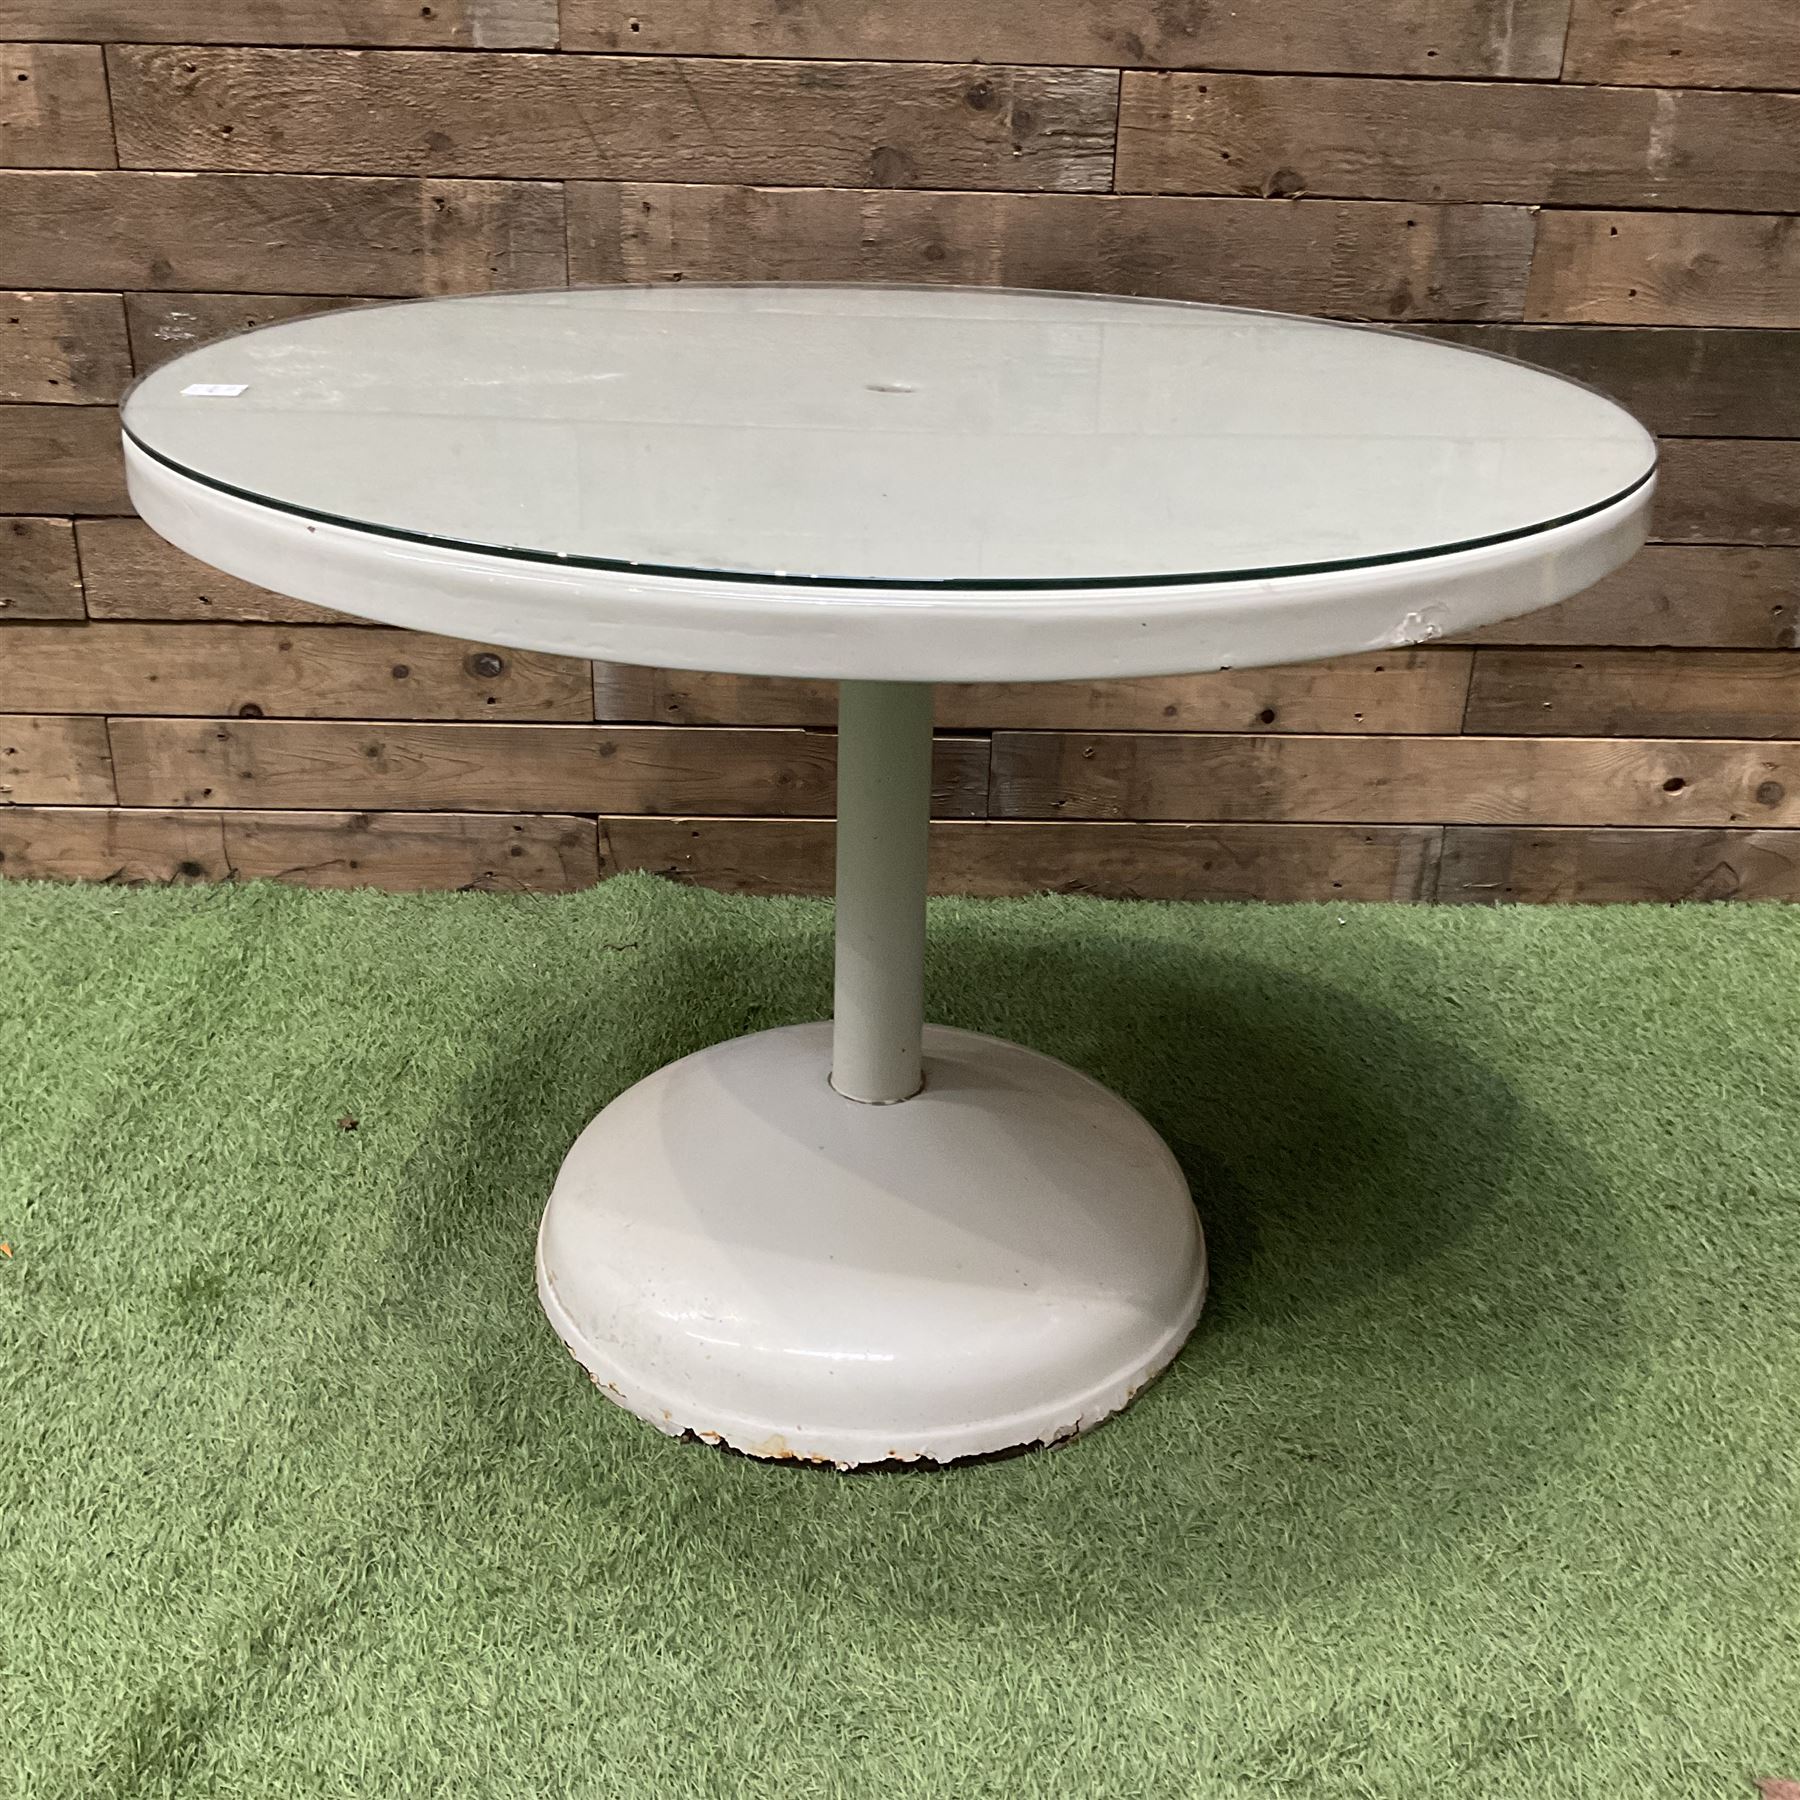 Circular white painted pedestal table with glass top